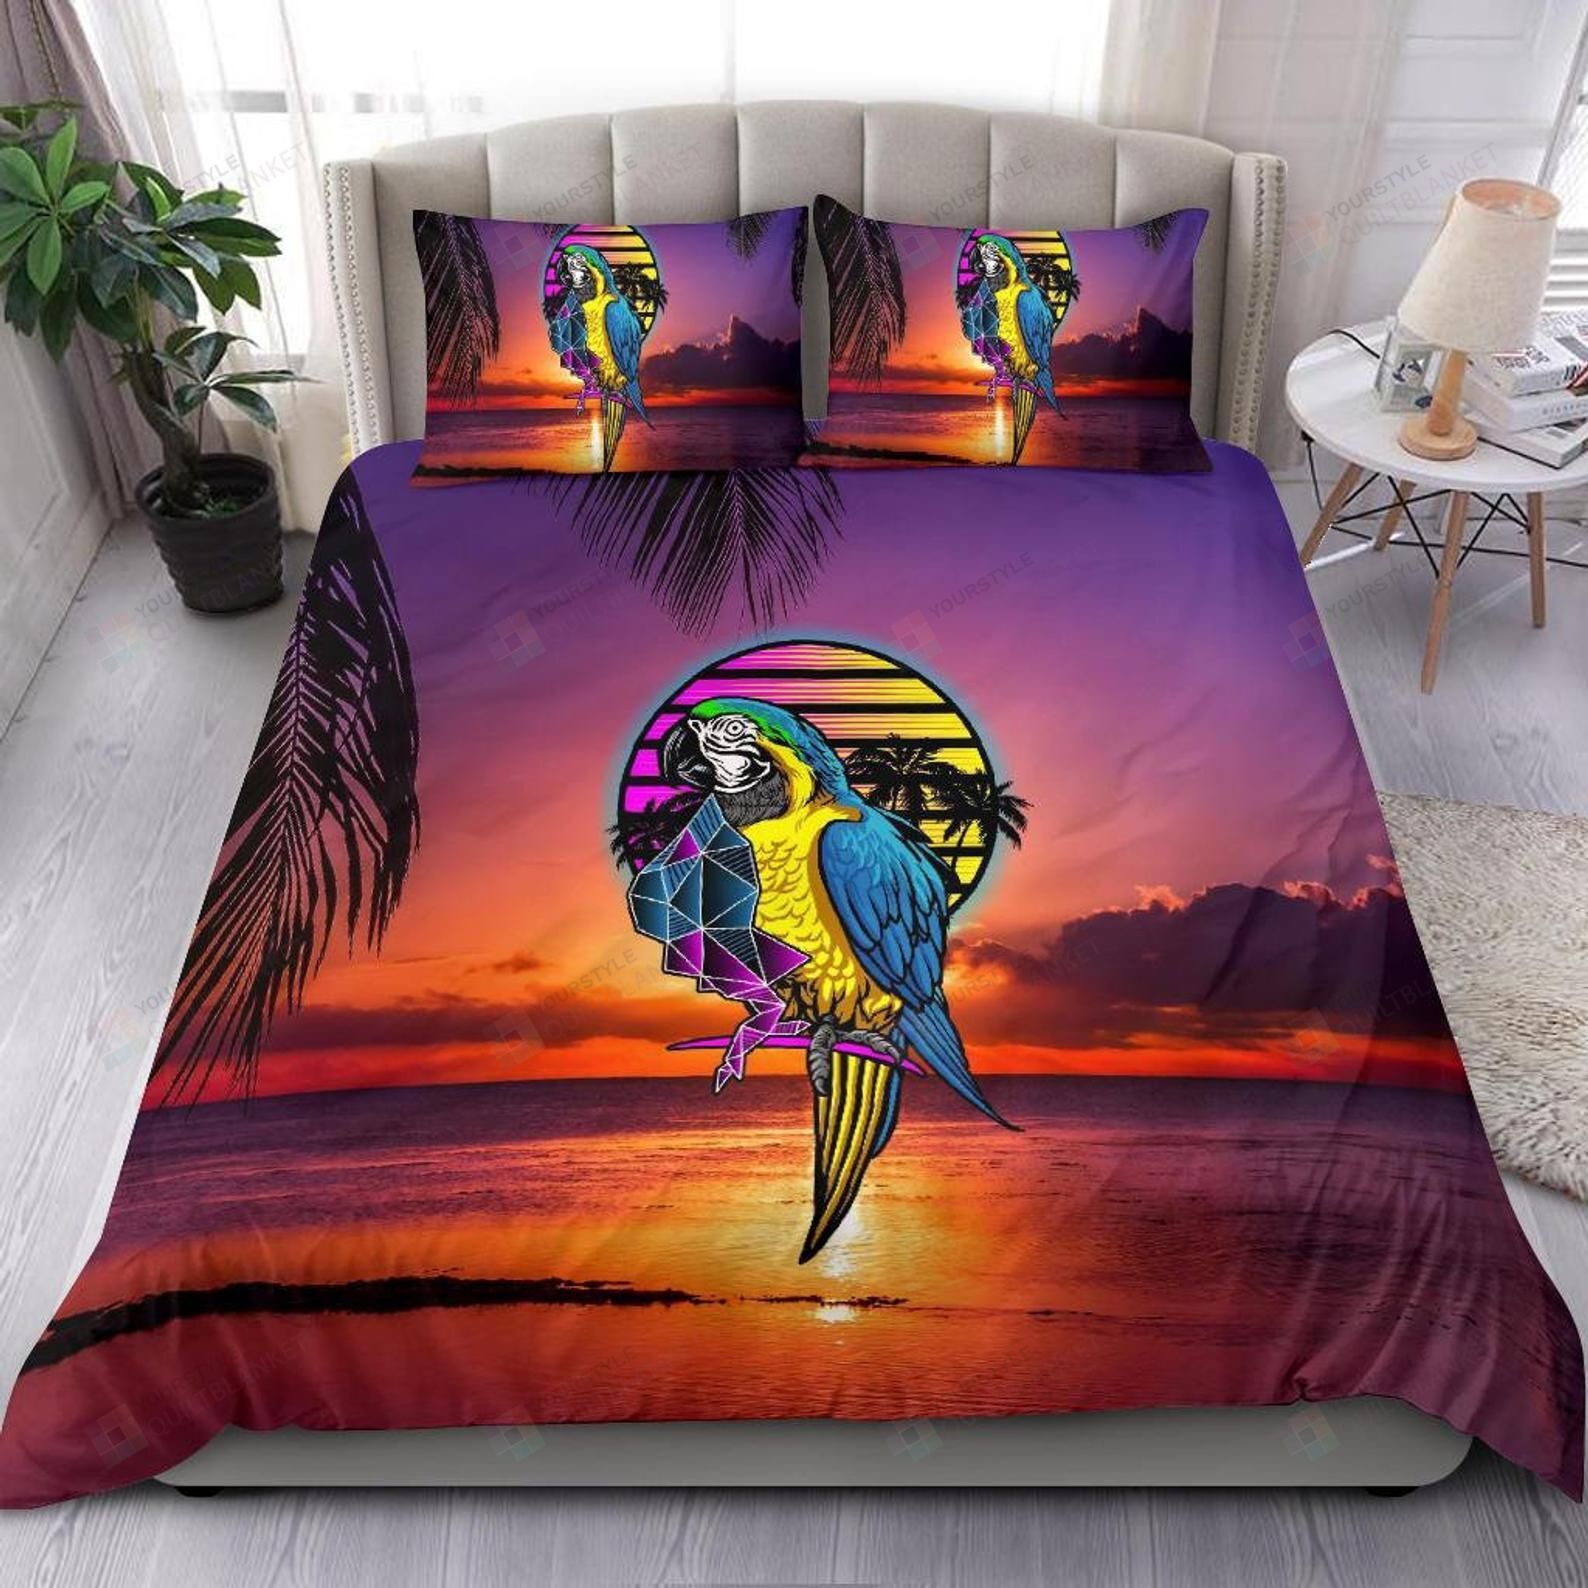 Sunset Parrot And Beach Bedding Set Bed Sheets Spread Comforter Duvet Cover Bedding Sets